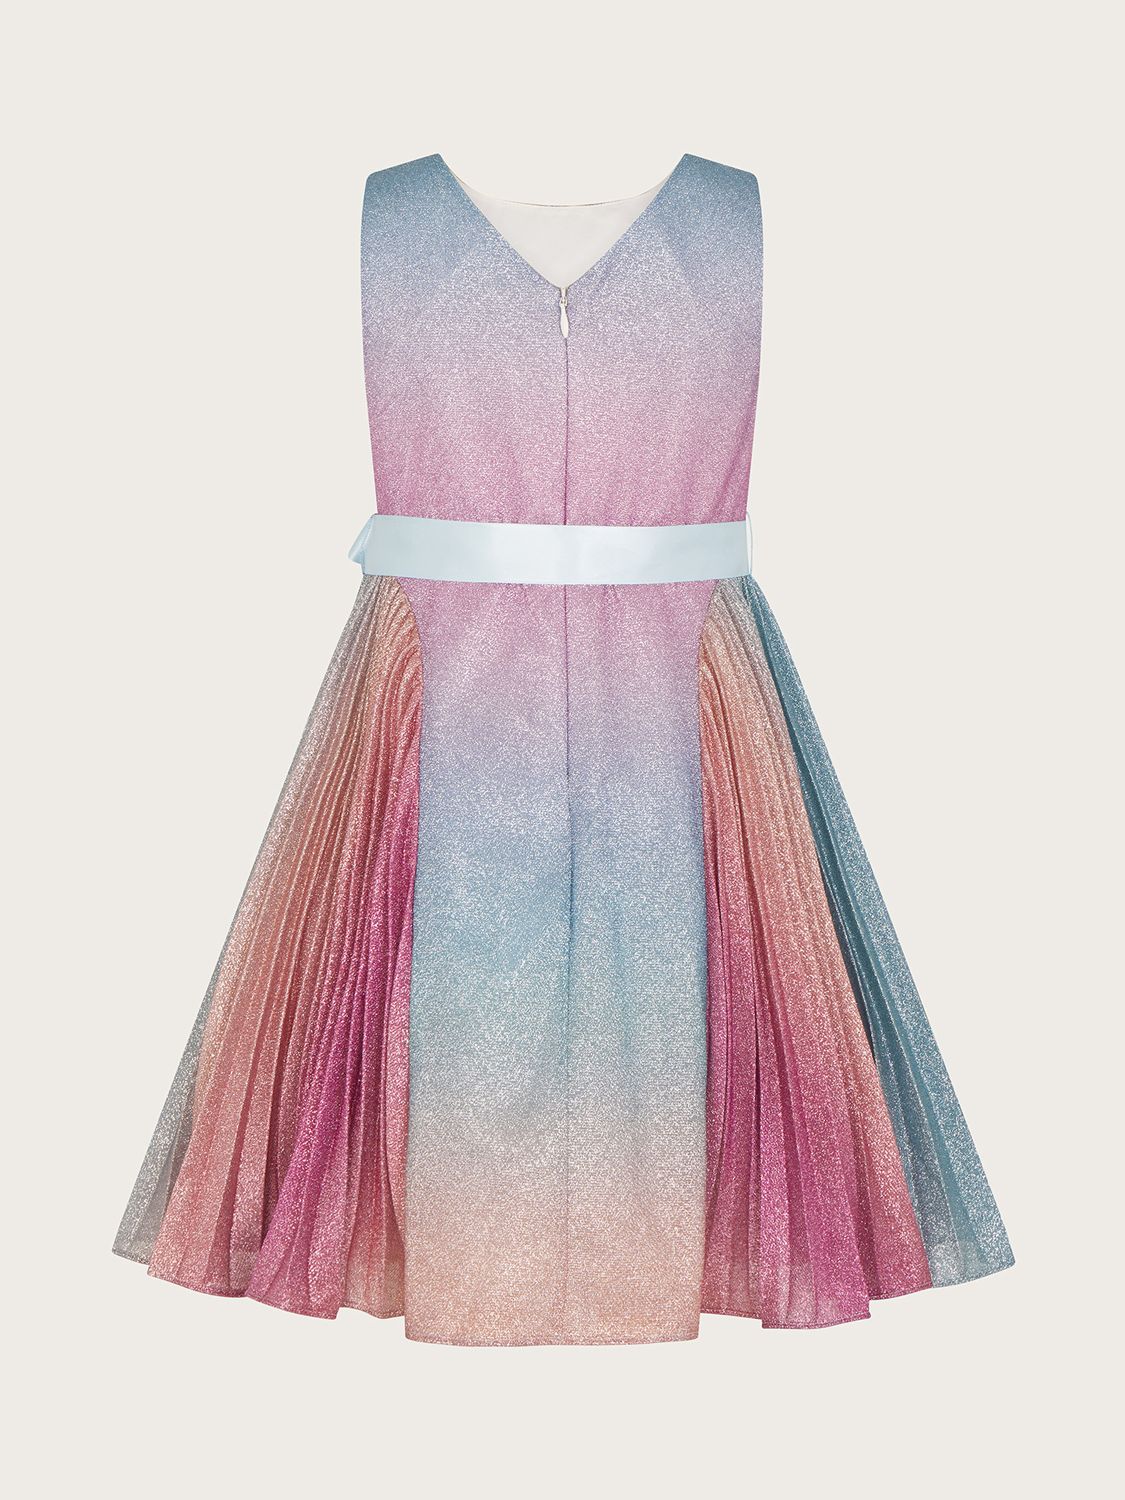 Buy Monsoon Kids' Rainbow Ombre Shimmer Pleated Party Dress, Multi Online at johnlewis.com